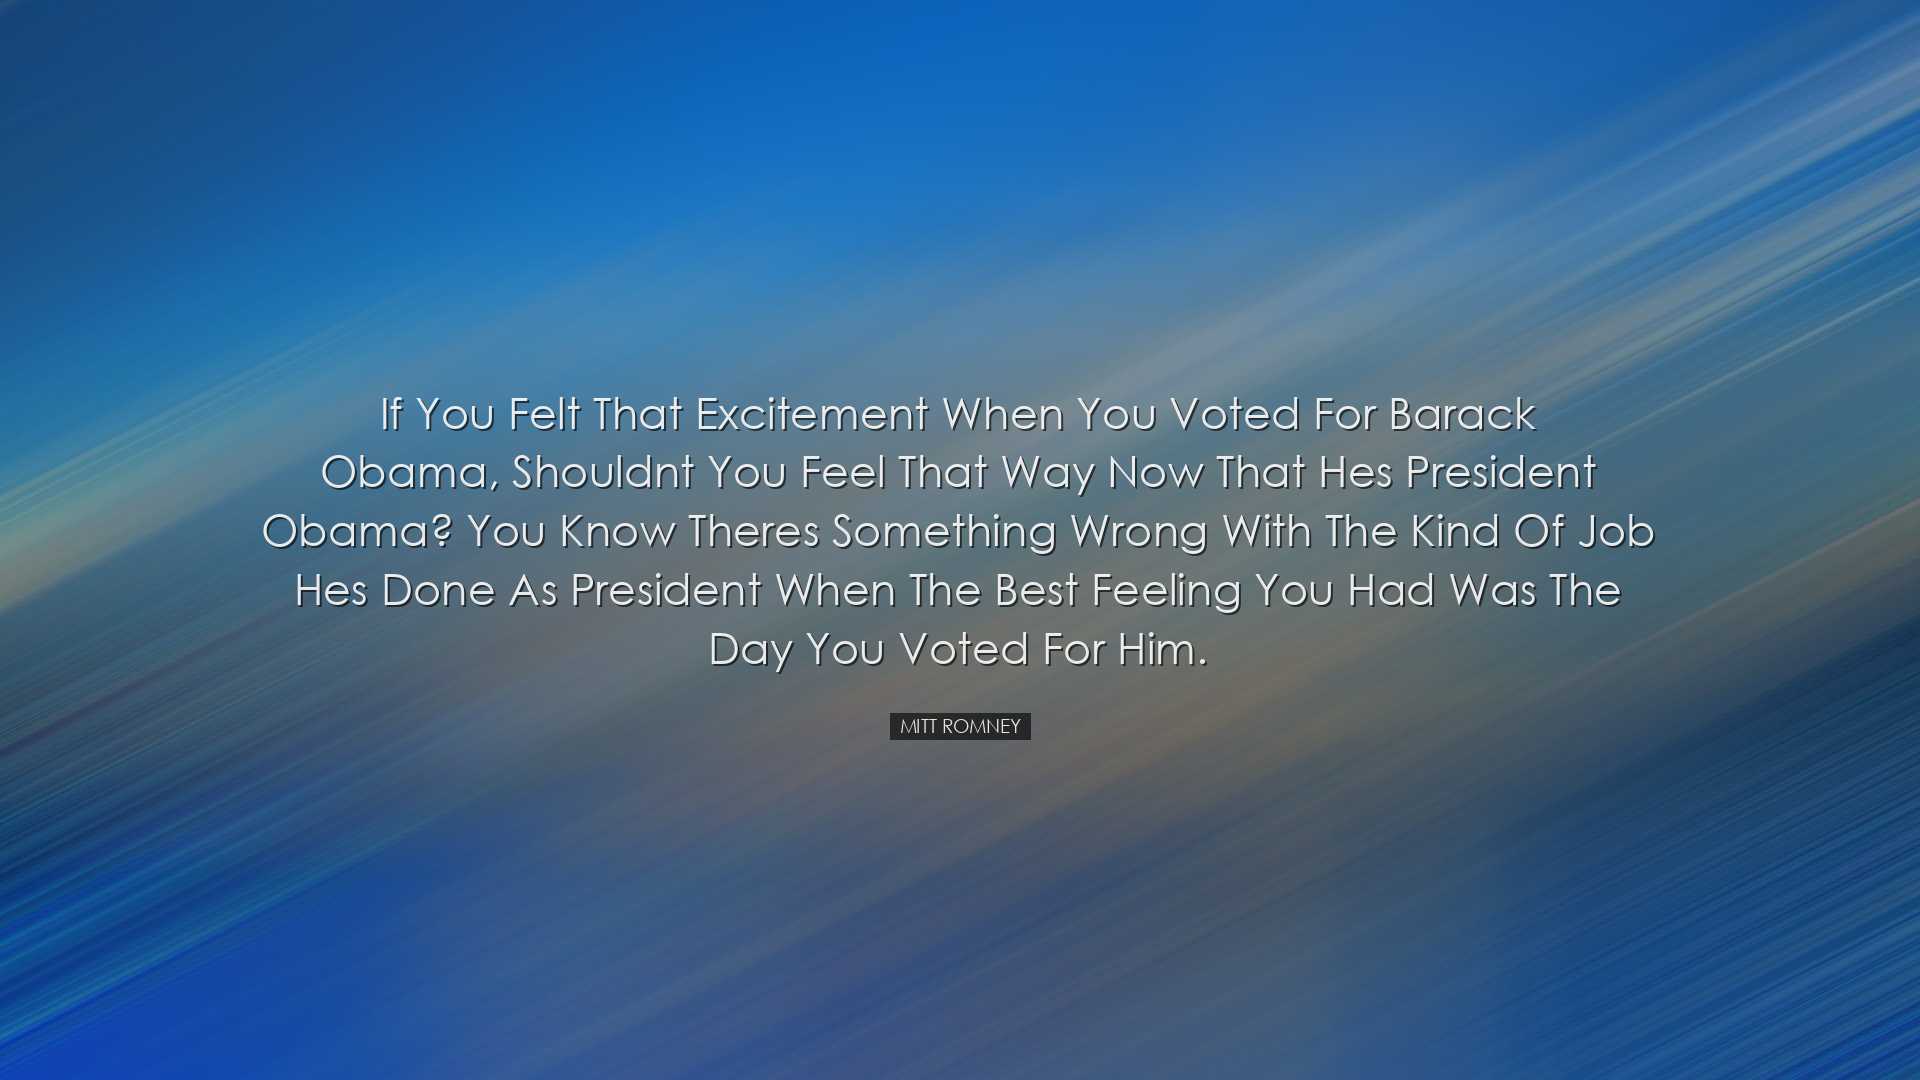 If you felt that excitement when you voted for Barack Obama, shoul